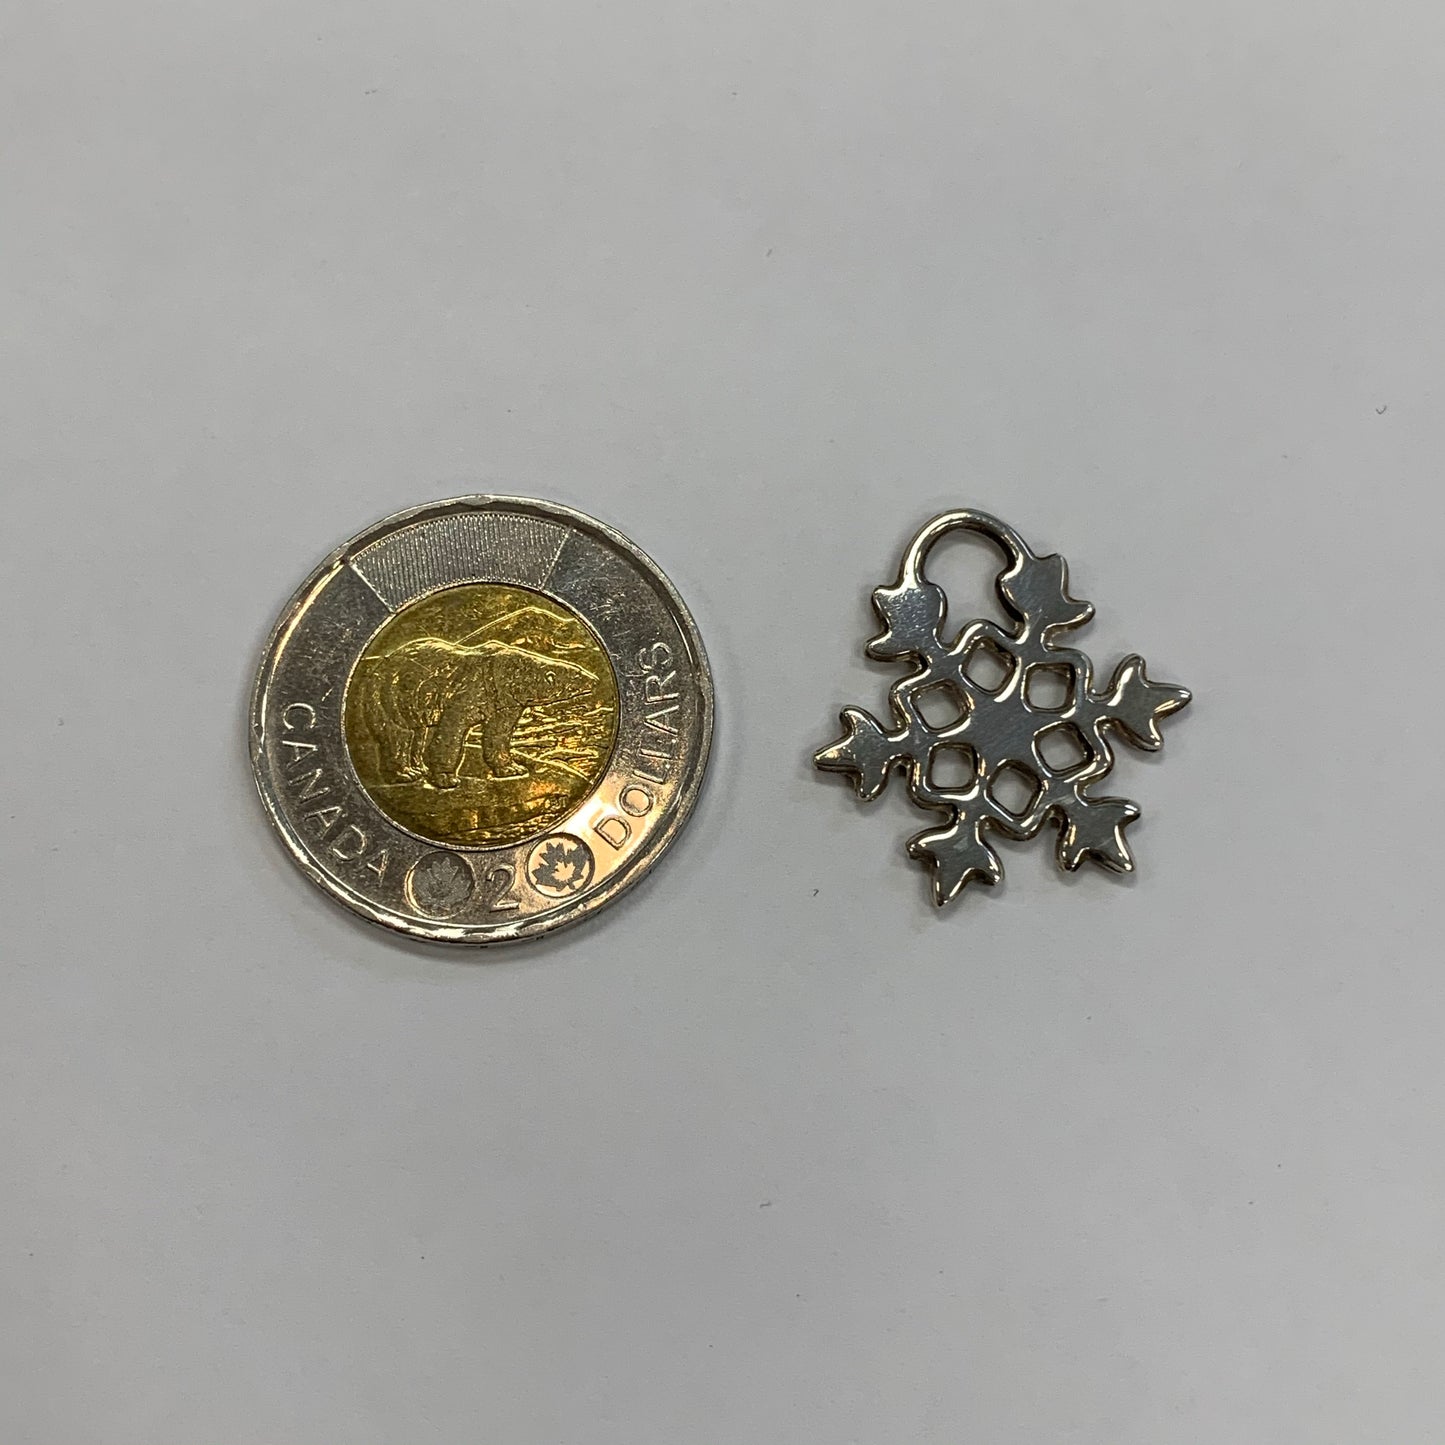 Authentic Tiffany Sterling Silver Snowflake Charm